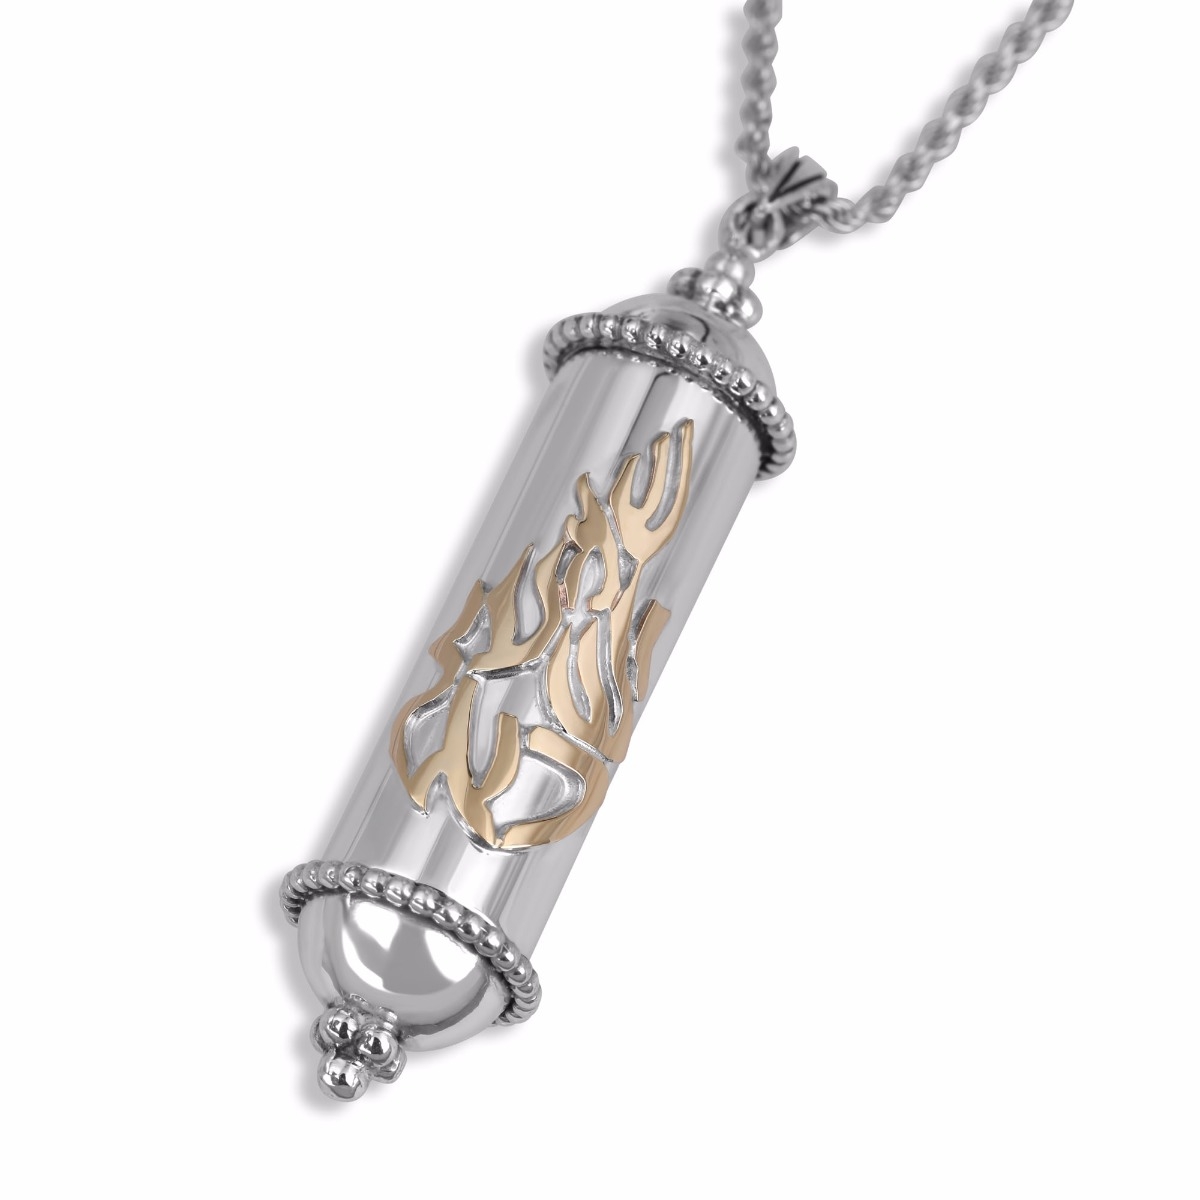 Men's Mezuzah Shema Yisrael 925 Sterling Silver and 9K Gold Necklace - 1